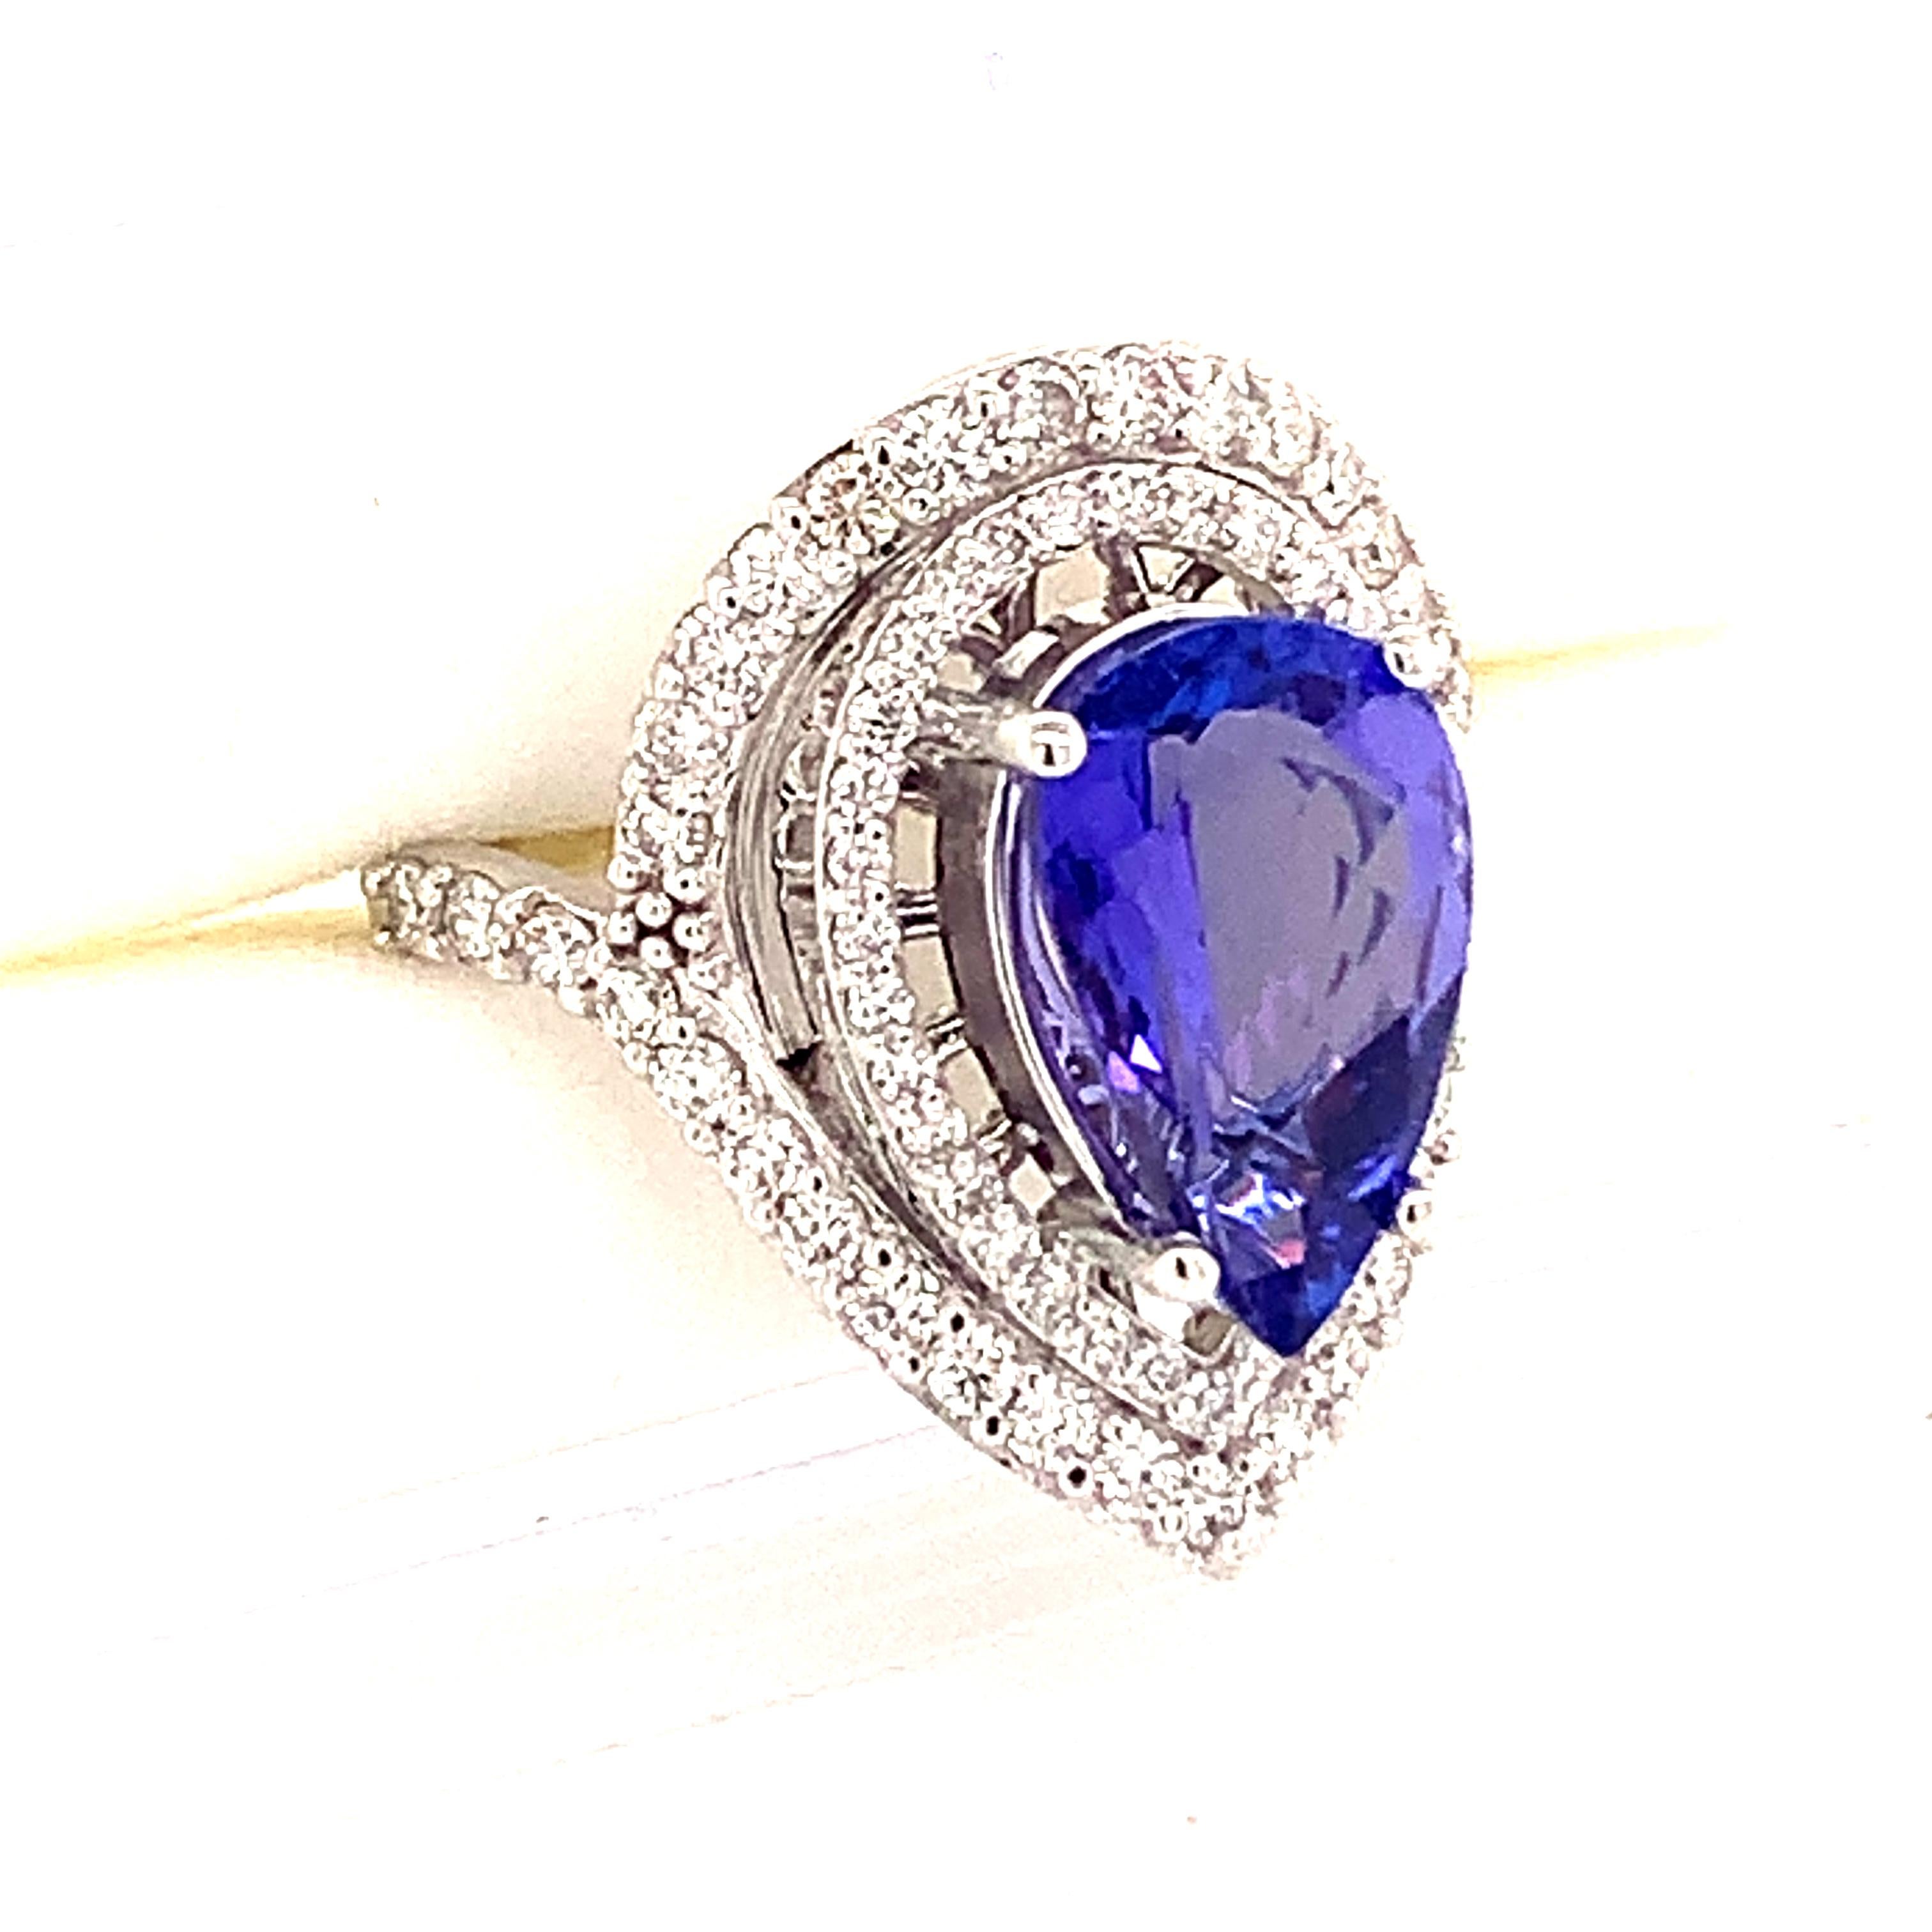 Pear Cut Natural Tanzanite Diamond Ring 14k Gold 4.54 TCW GIA Certified For Sale